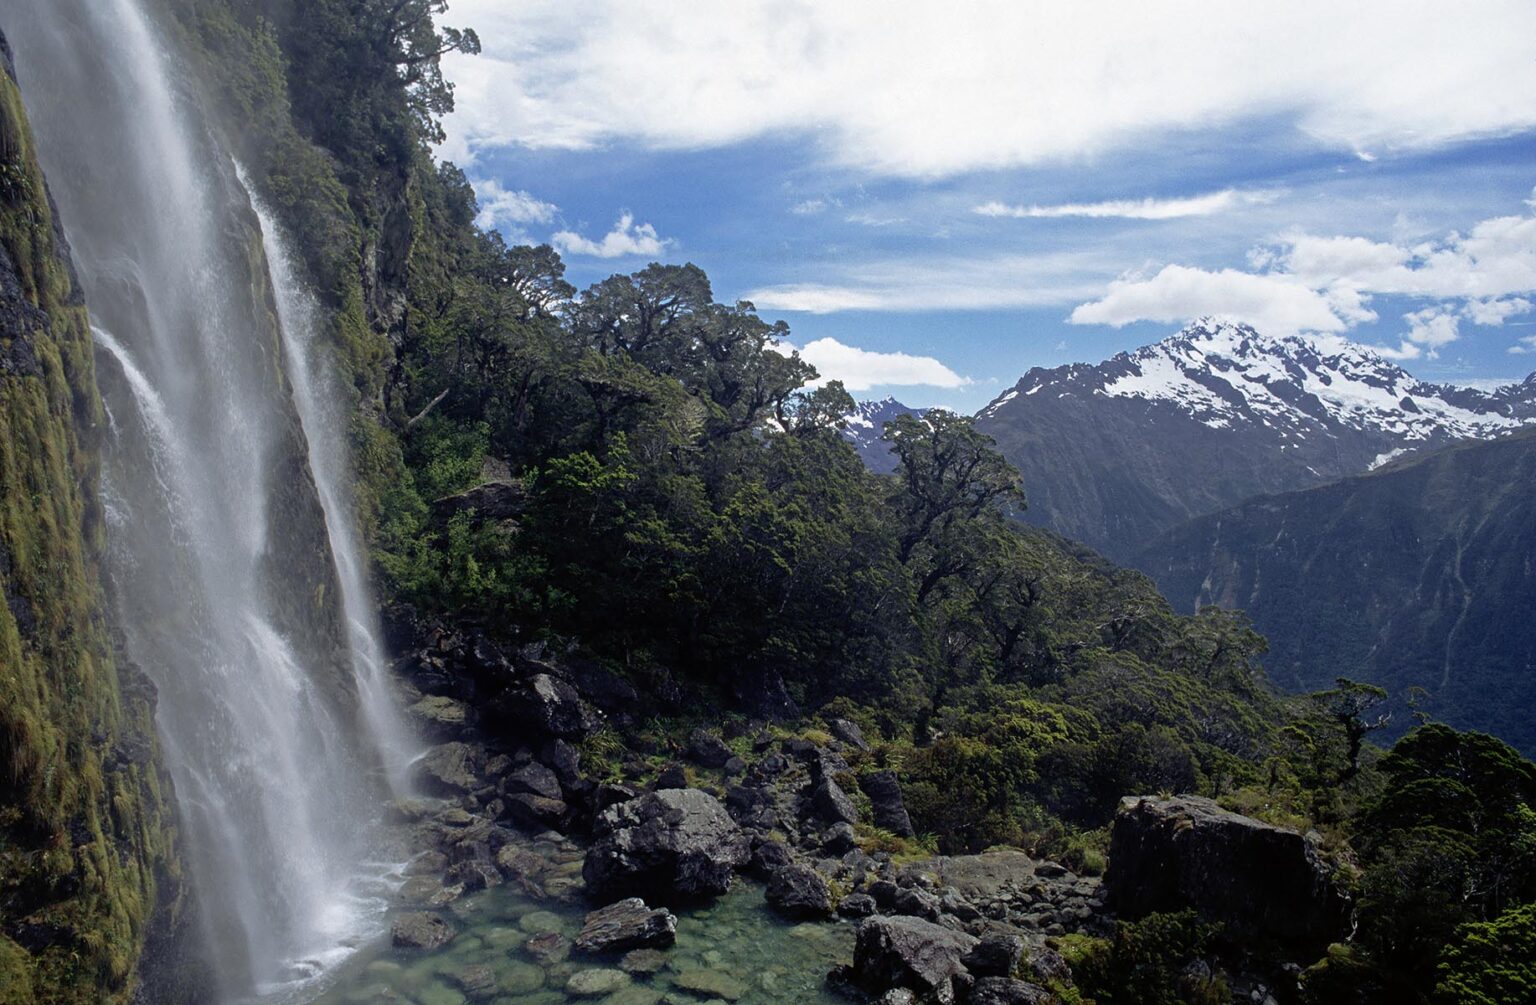 Spectacular EARLAND FALLS & MT CHRISTINA along the ROUTEBURN TRACK - FIORDLAND NATIONAL PARK, NEW ZEALAND'S SOUTHLAND